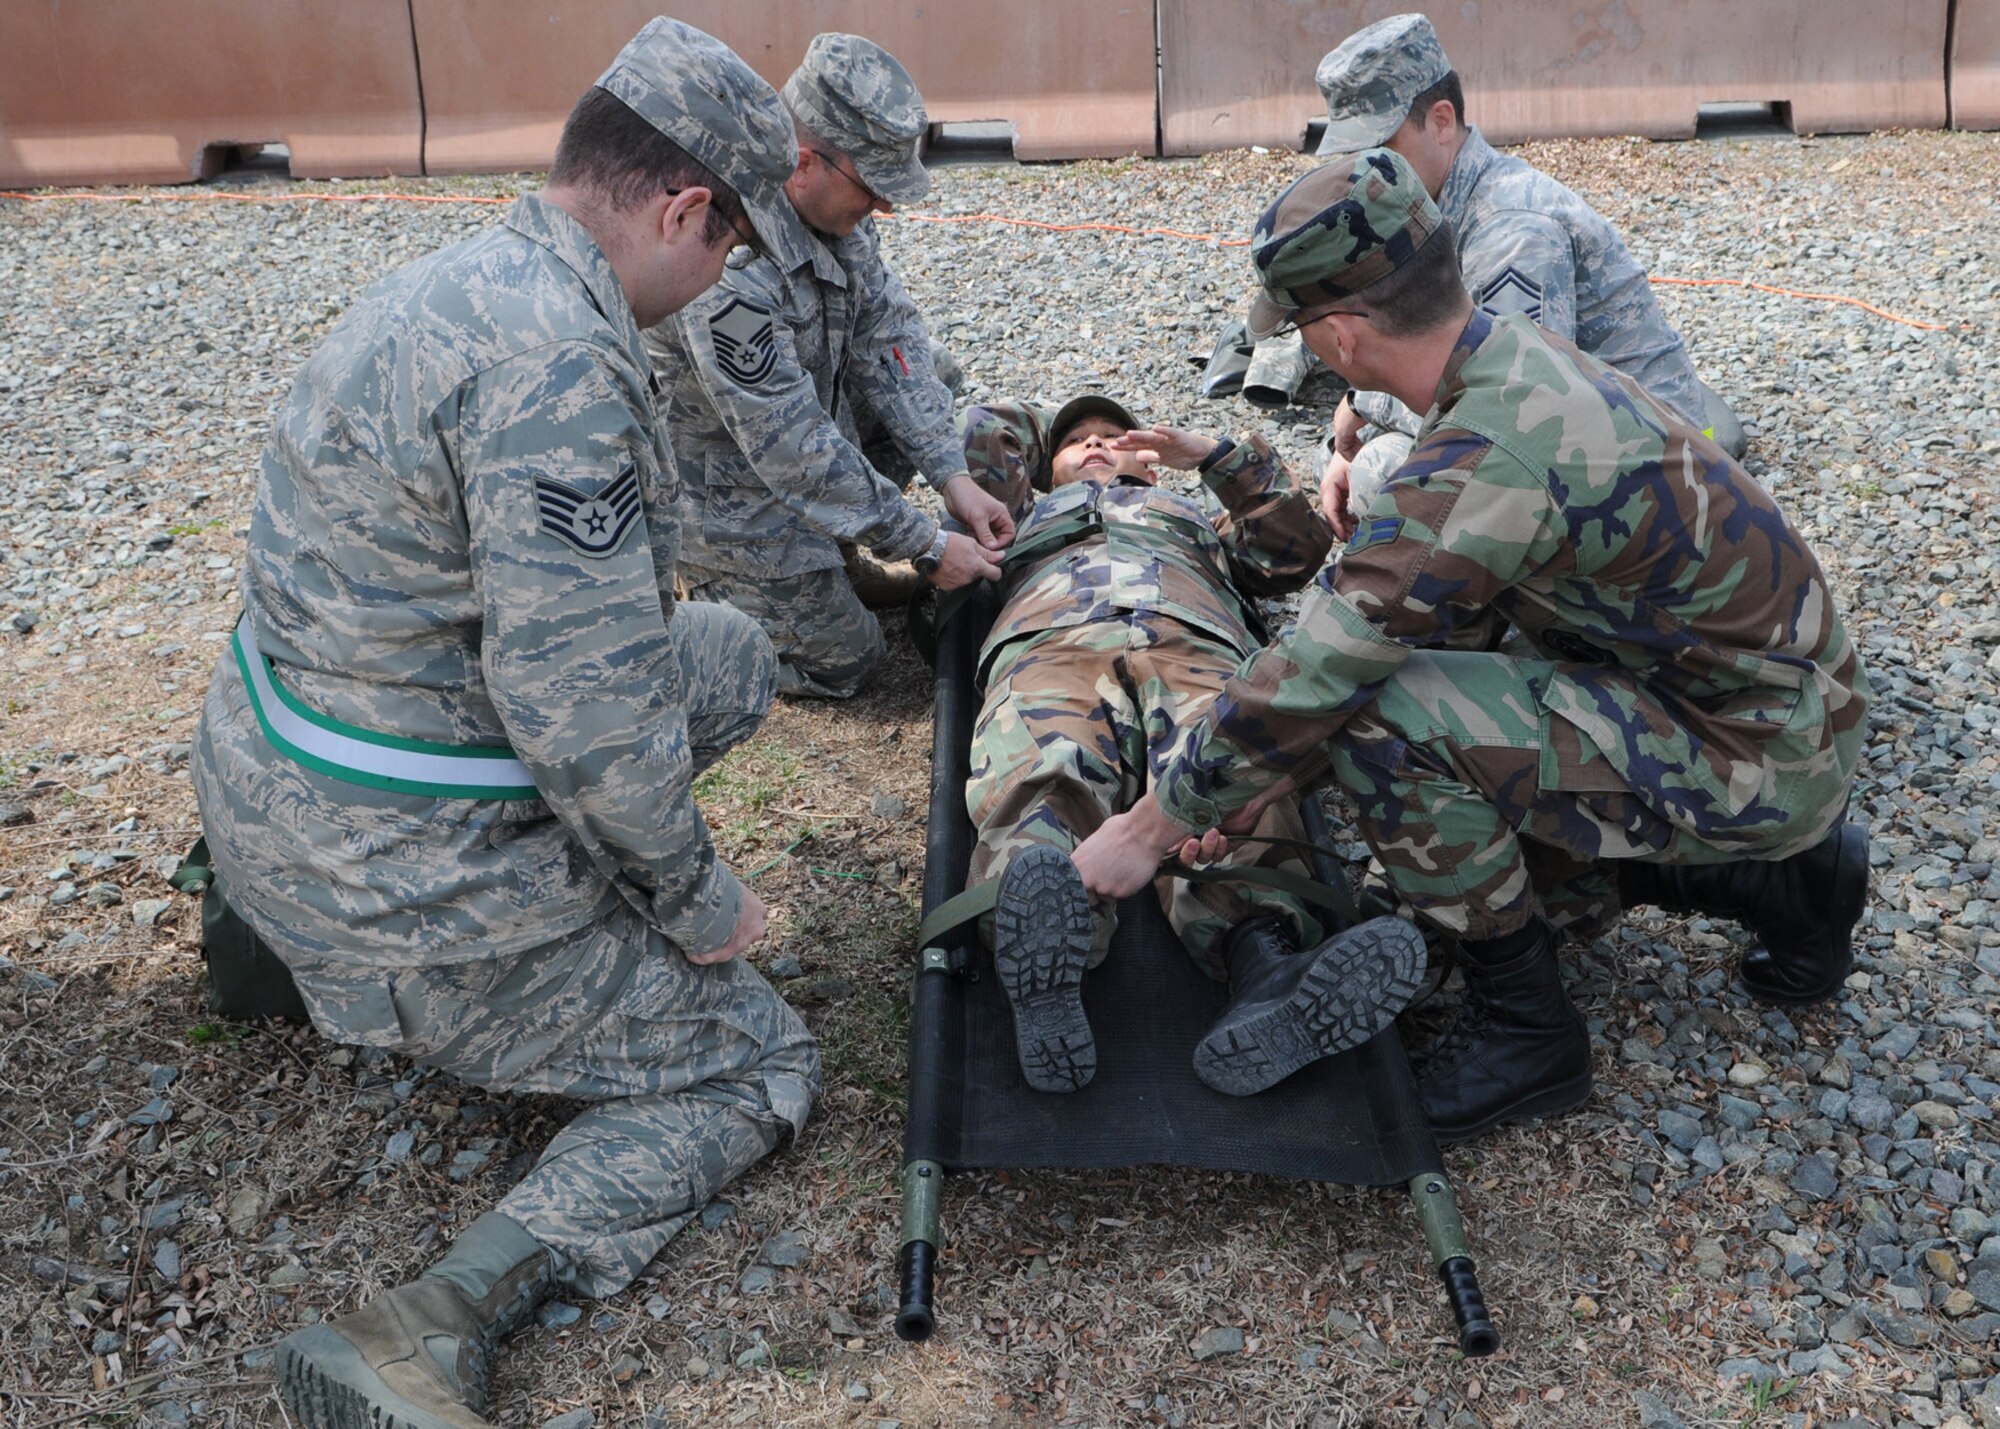 DAEGU AIR BASE, Republic of Korea -- Tech. Sgt. Jose Llanes (on stretcher), from the 353rd Operations Support Squadron Medical Flight, instructs members of the 353rd Special Operations Group on how to properly secure a patient to a stretcher during training here March 16. The training is in preparation for the group's annual operational readiness exercise which affords unit members an opportunity to practice wartime skills necessary for their ability to survive and operate. The 353rd Special Operations Group is the focal point for all U.S. Air Force special operations activities throughout the U.S. Pacific Command theater. (U.S. Air Force photo by Tech. Sgt. Aaron Cram)